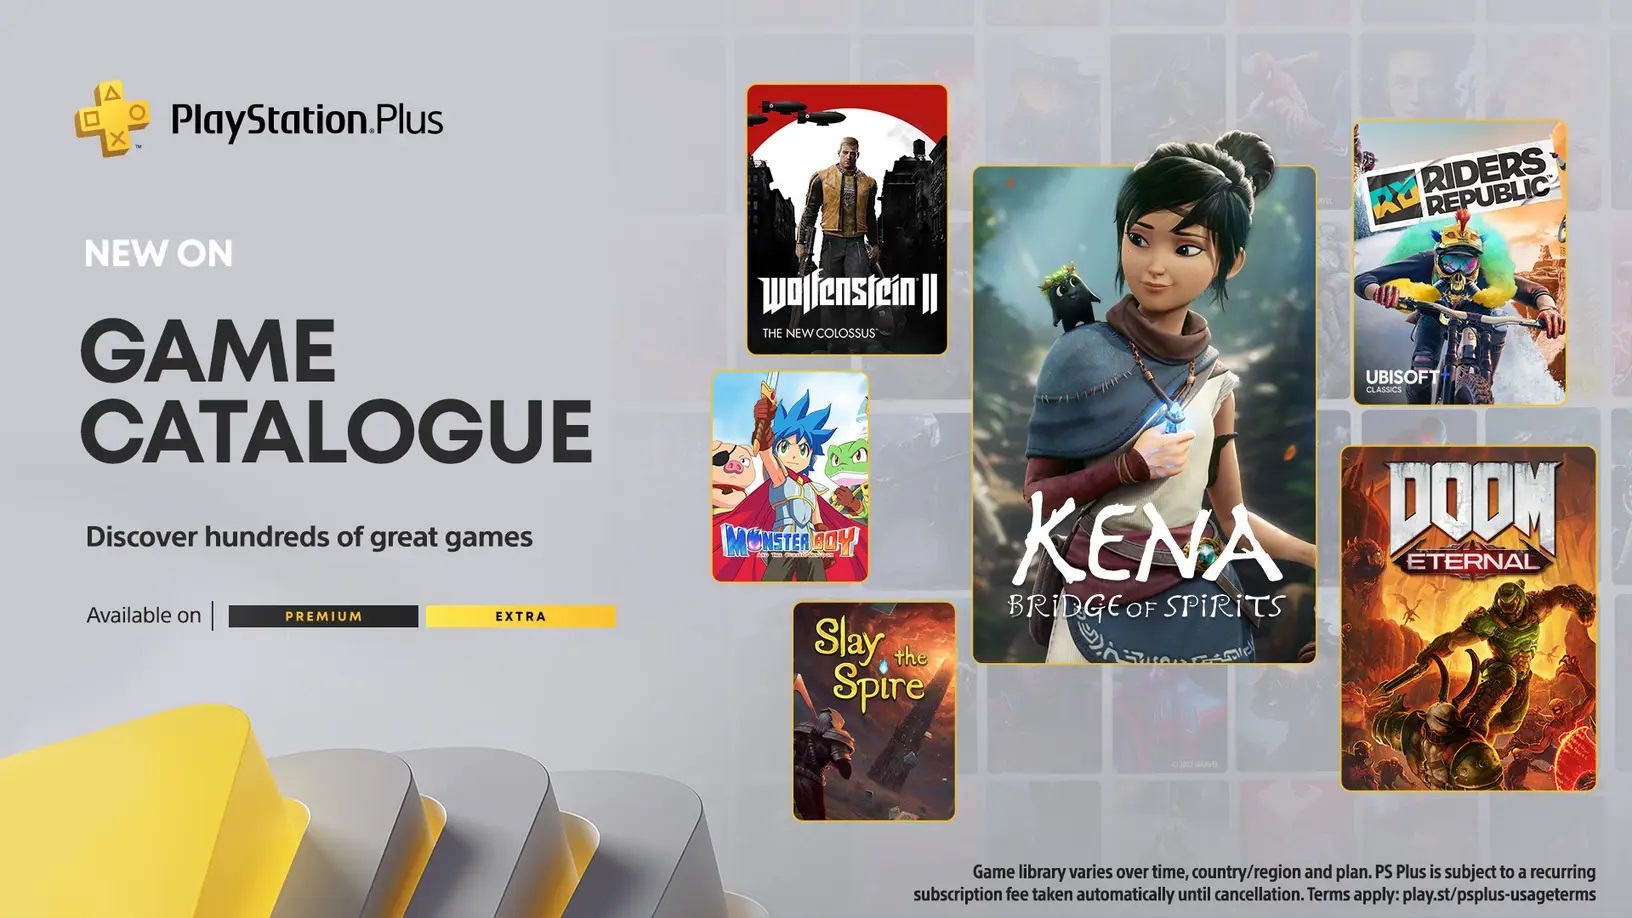 Doom Eternal, Wolfenstein II, Kena: Bridge of Spirits and Slay the Spire are available on PlayStation Plus